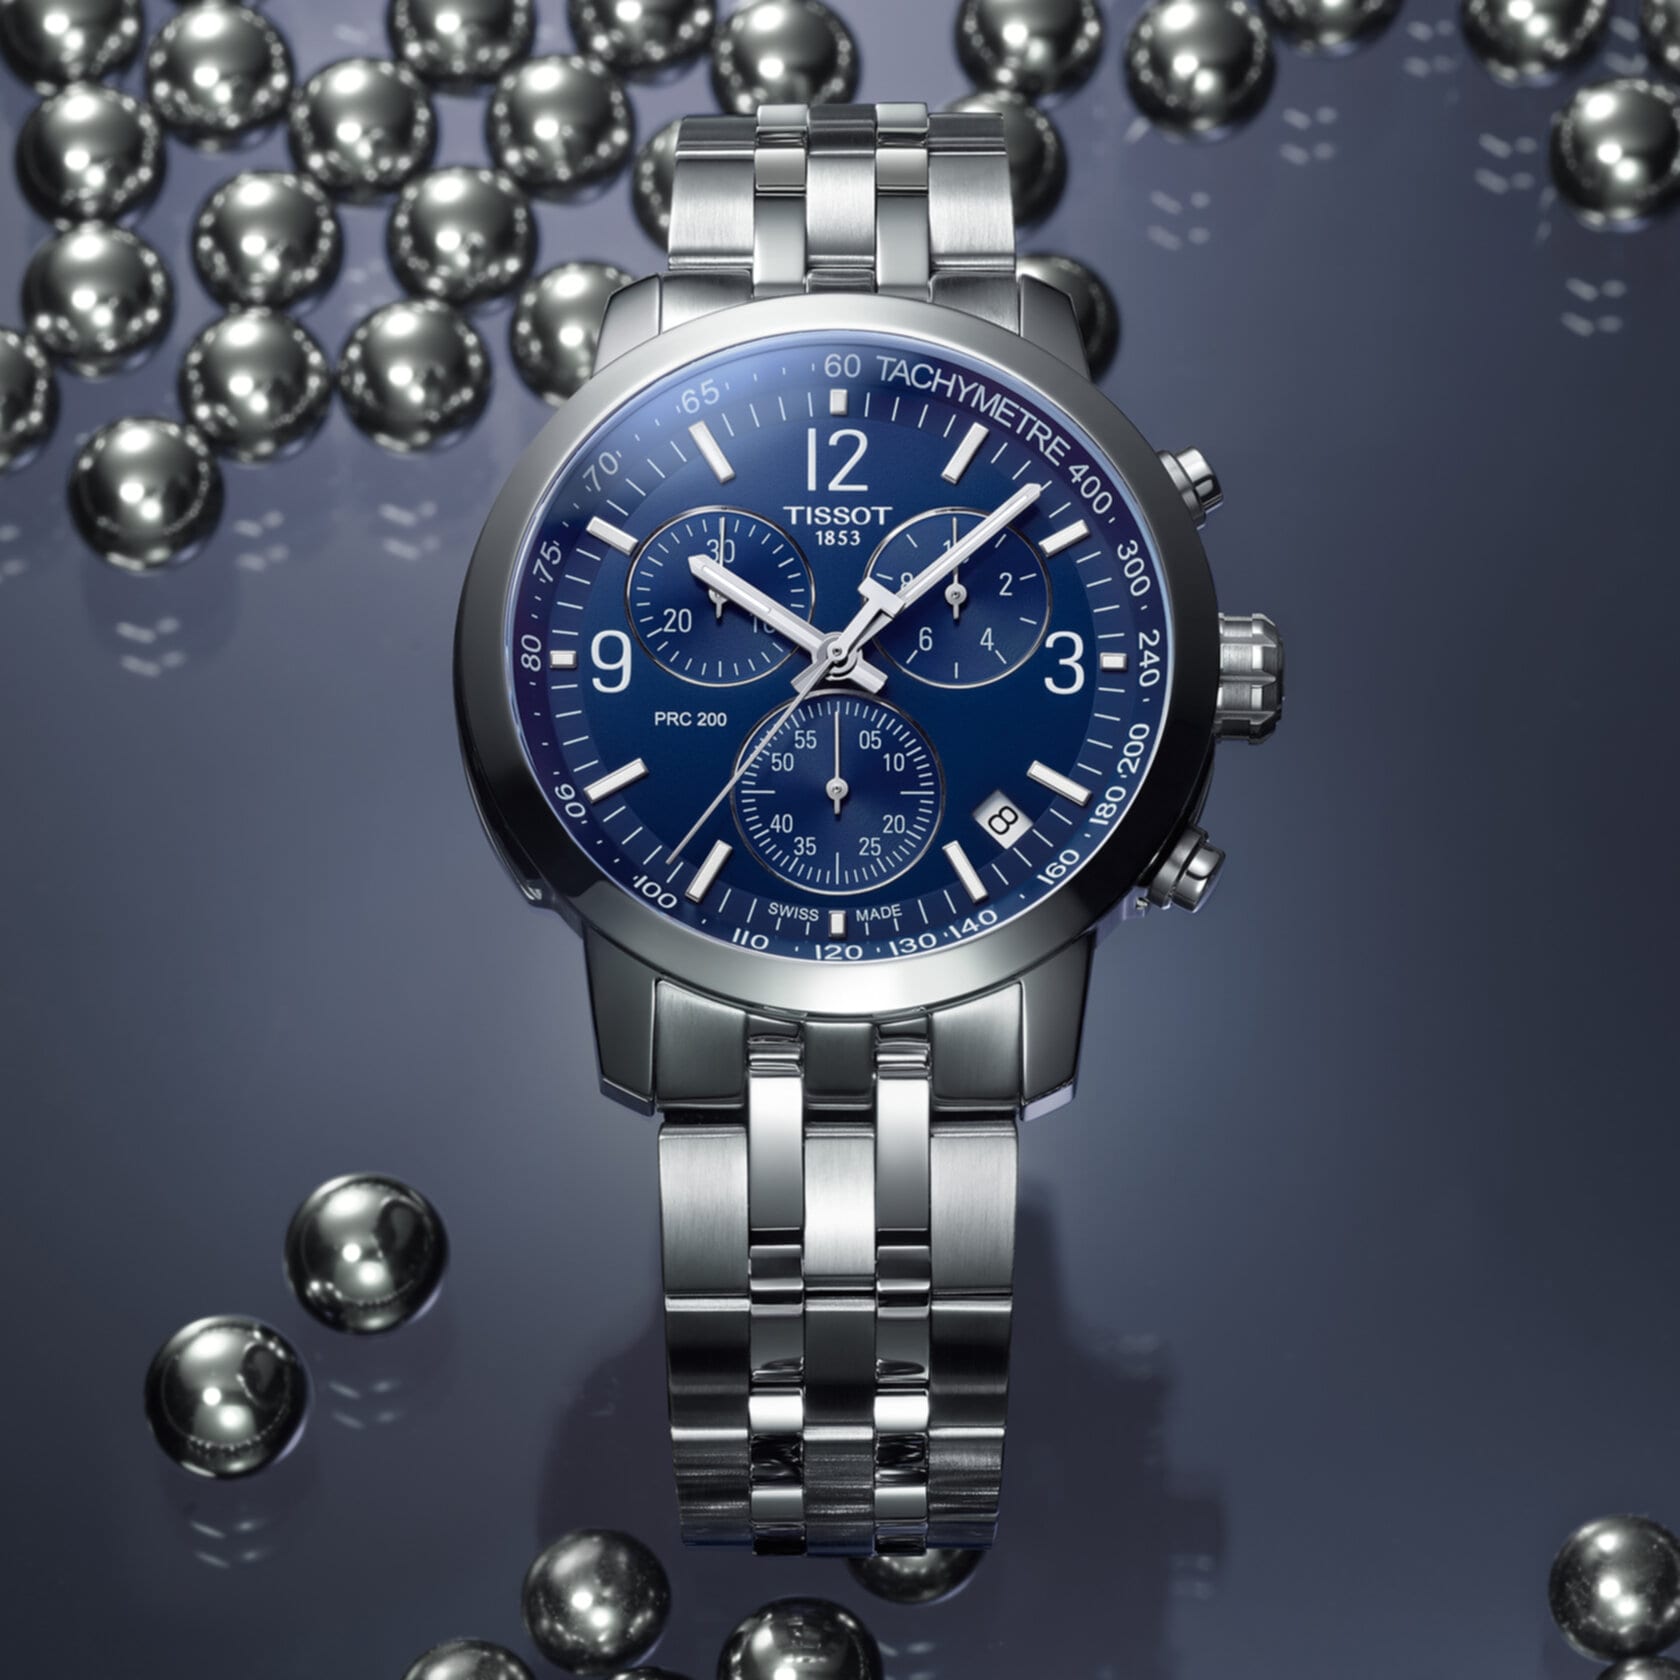 Introducing Our New Custom Tissot PRX and Oris Divers Watches – IFL Watches